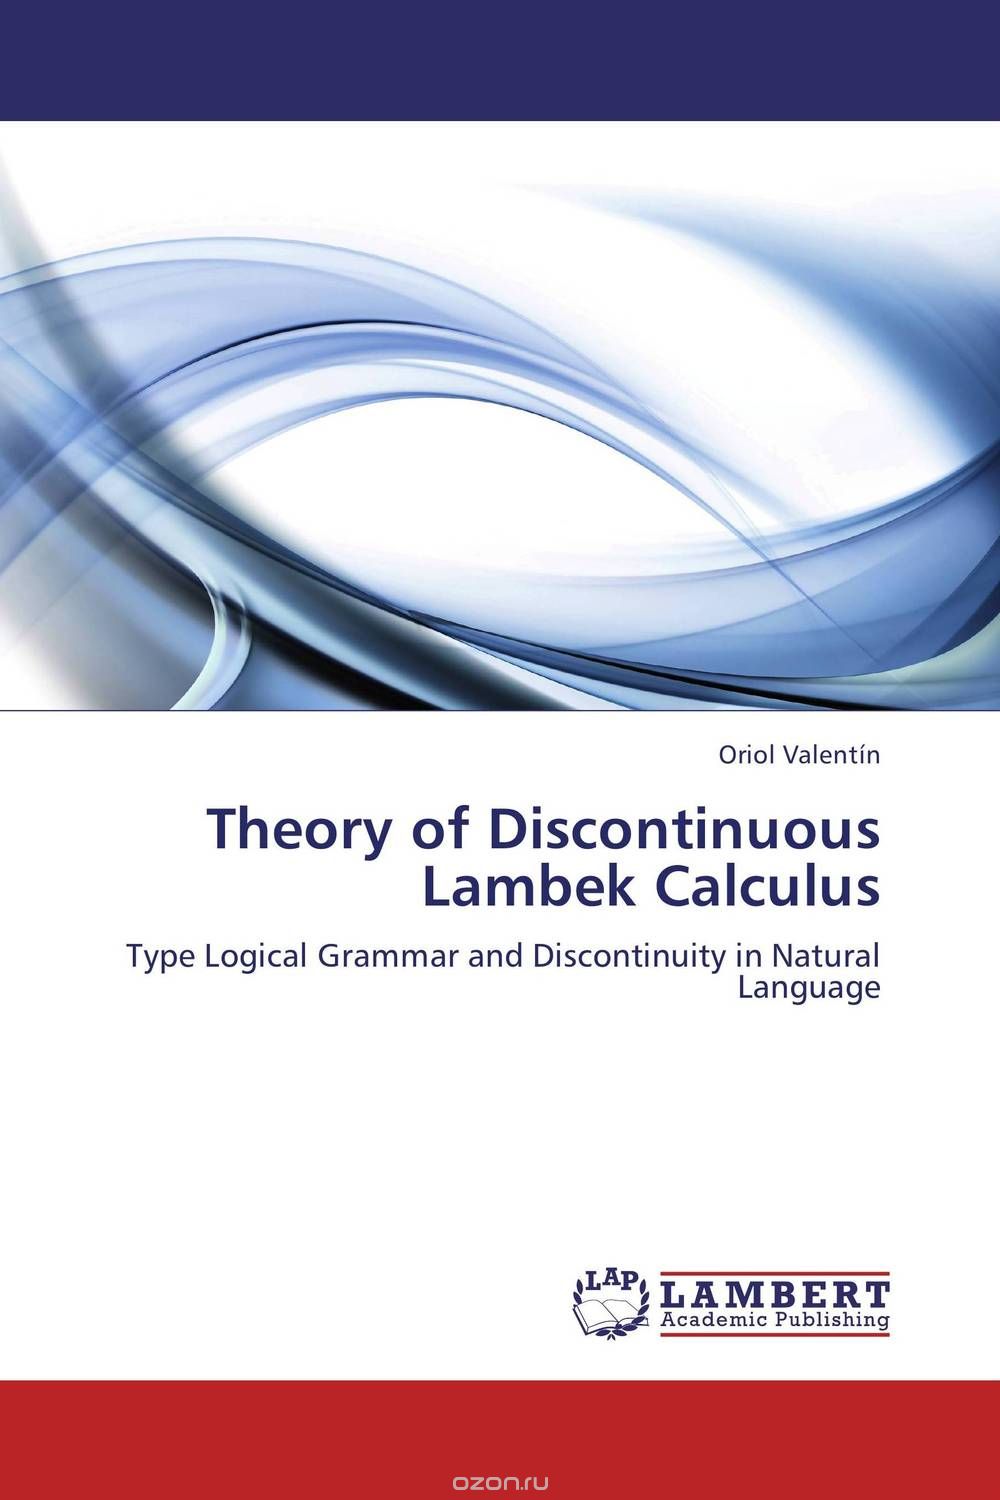 Theory of Discontinuous Lambek Calculus